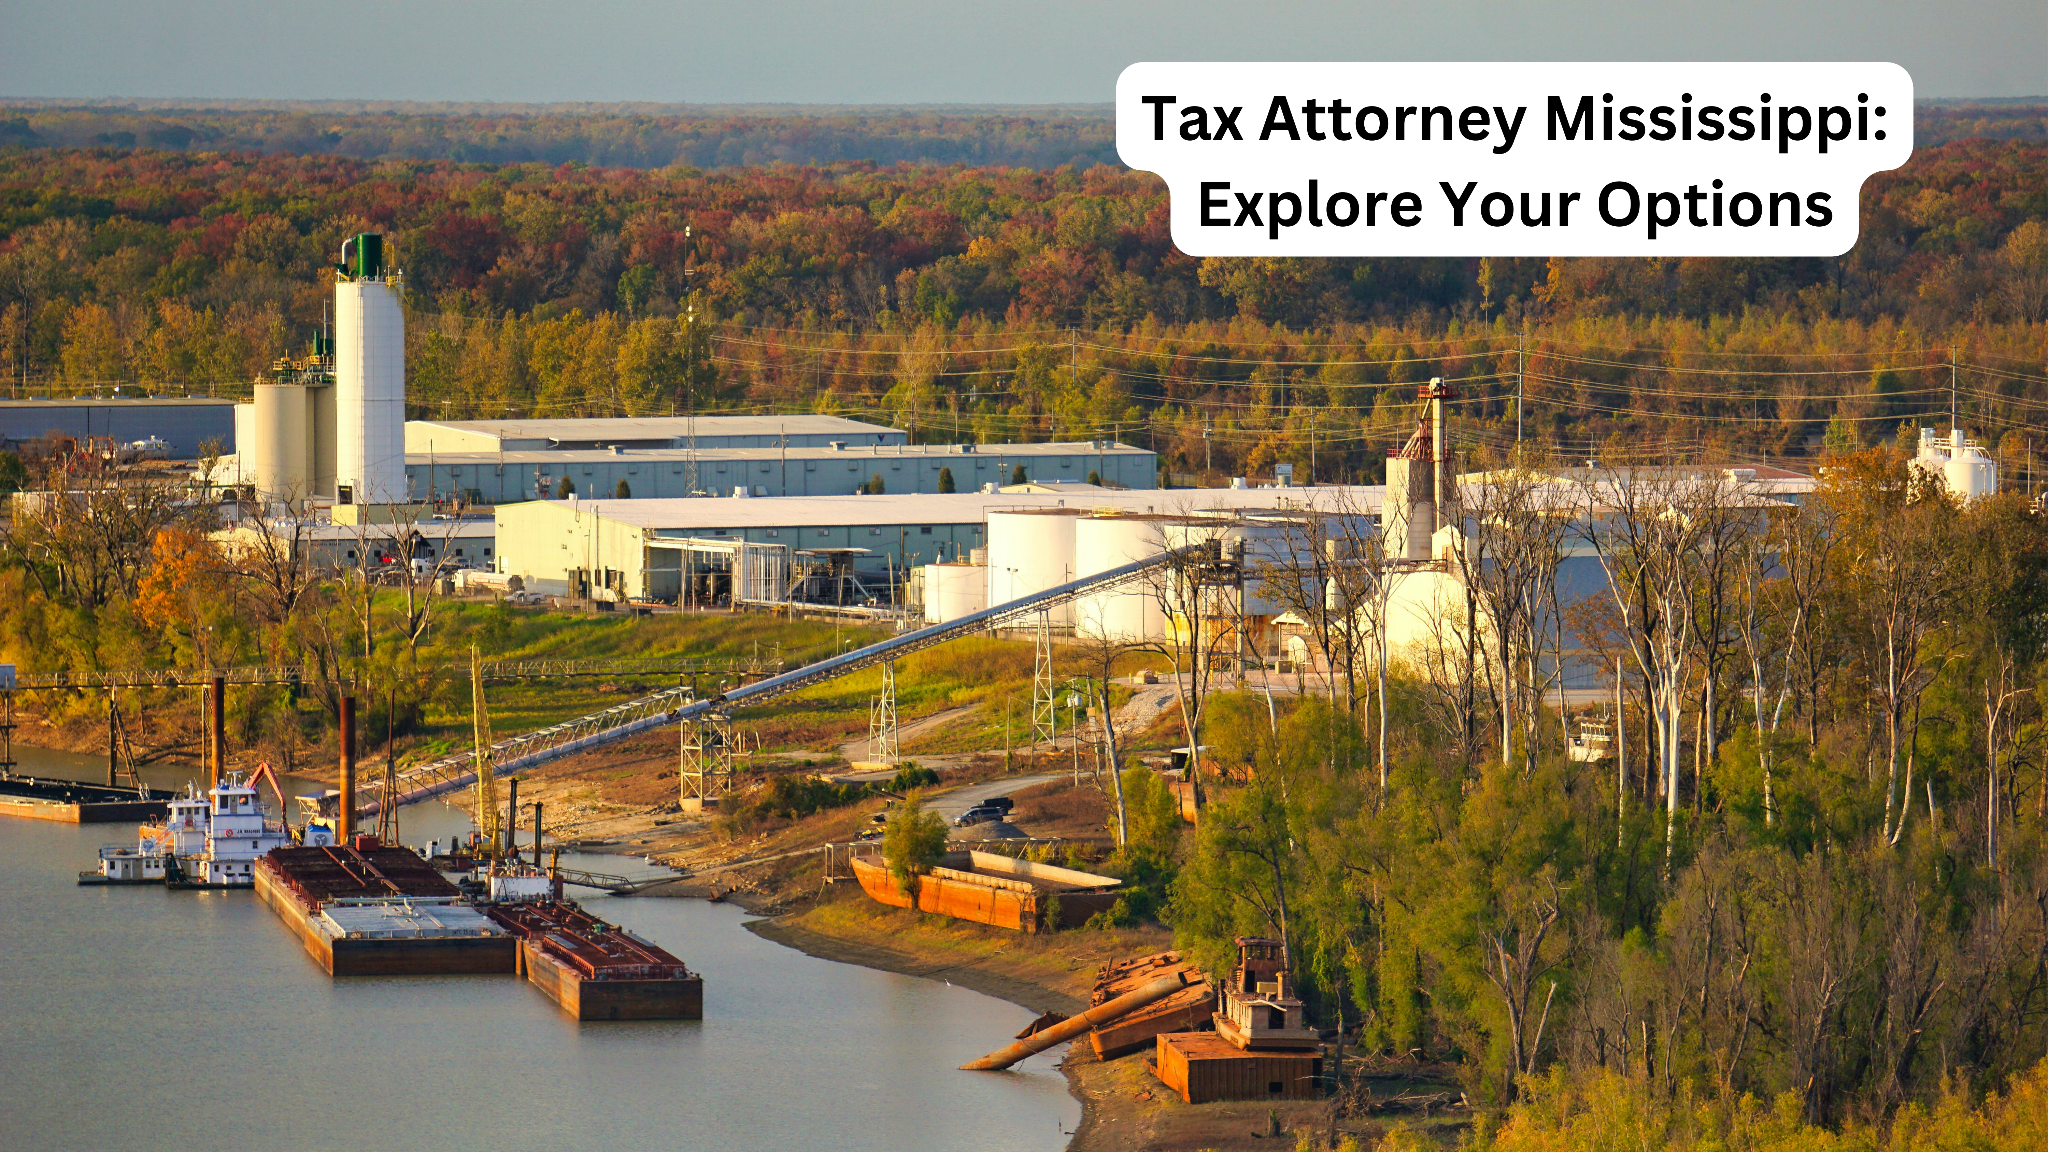 Tax Attorney Mississippi: Explore Your Options